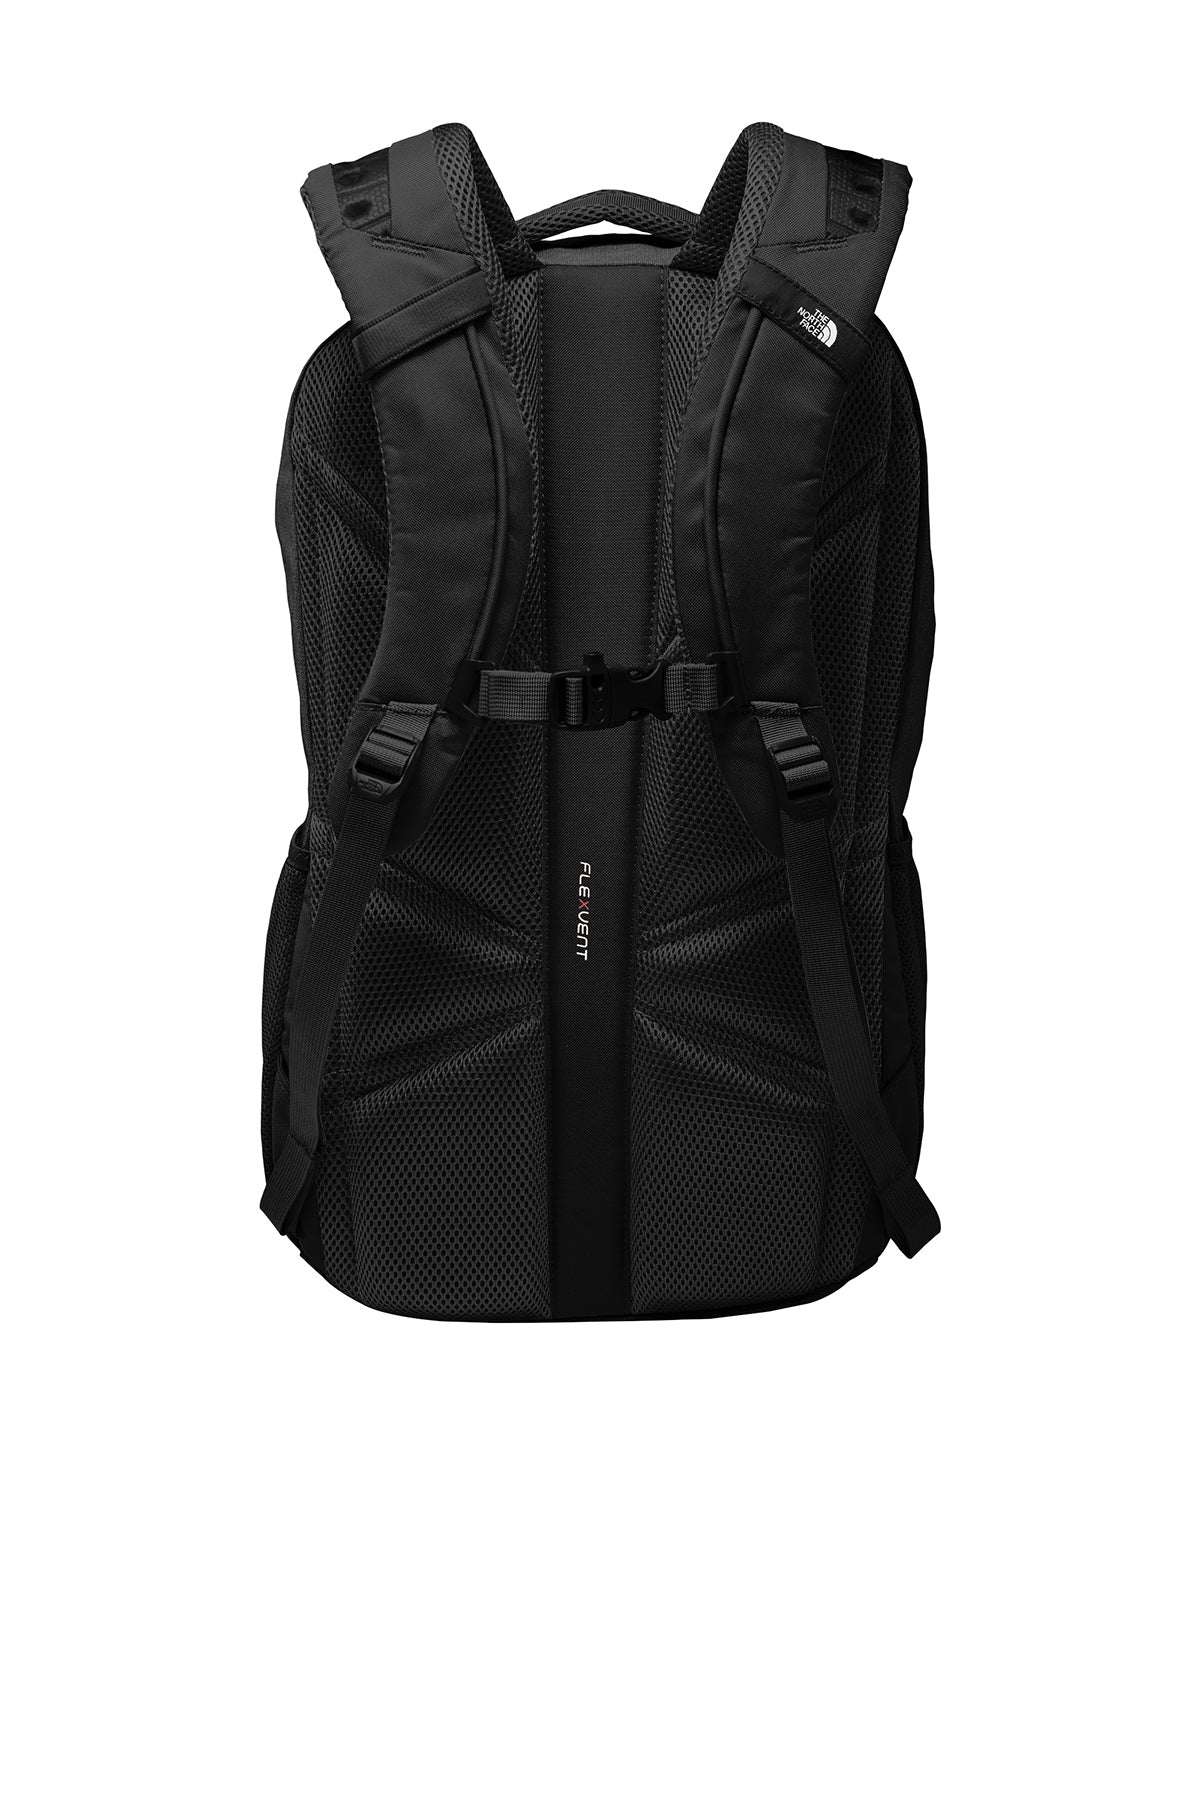 NF0A3KX8 The North Face ® Connector Backpack